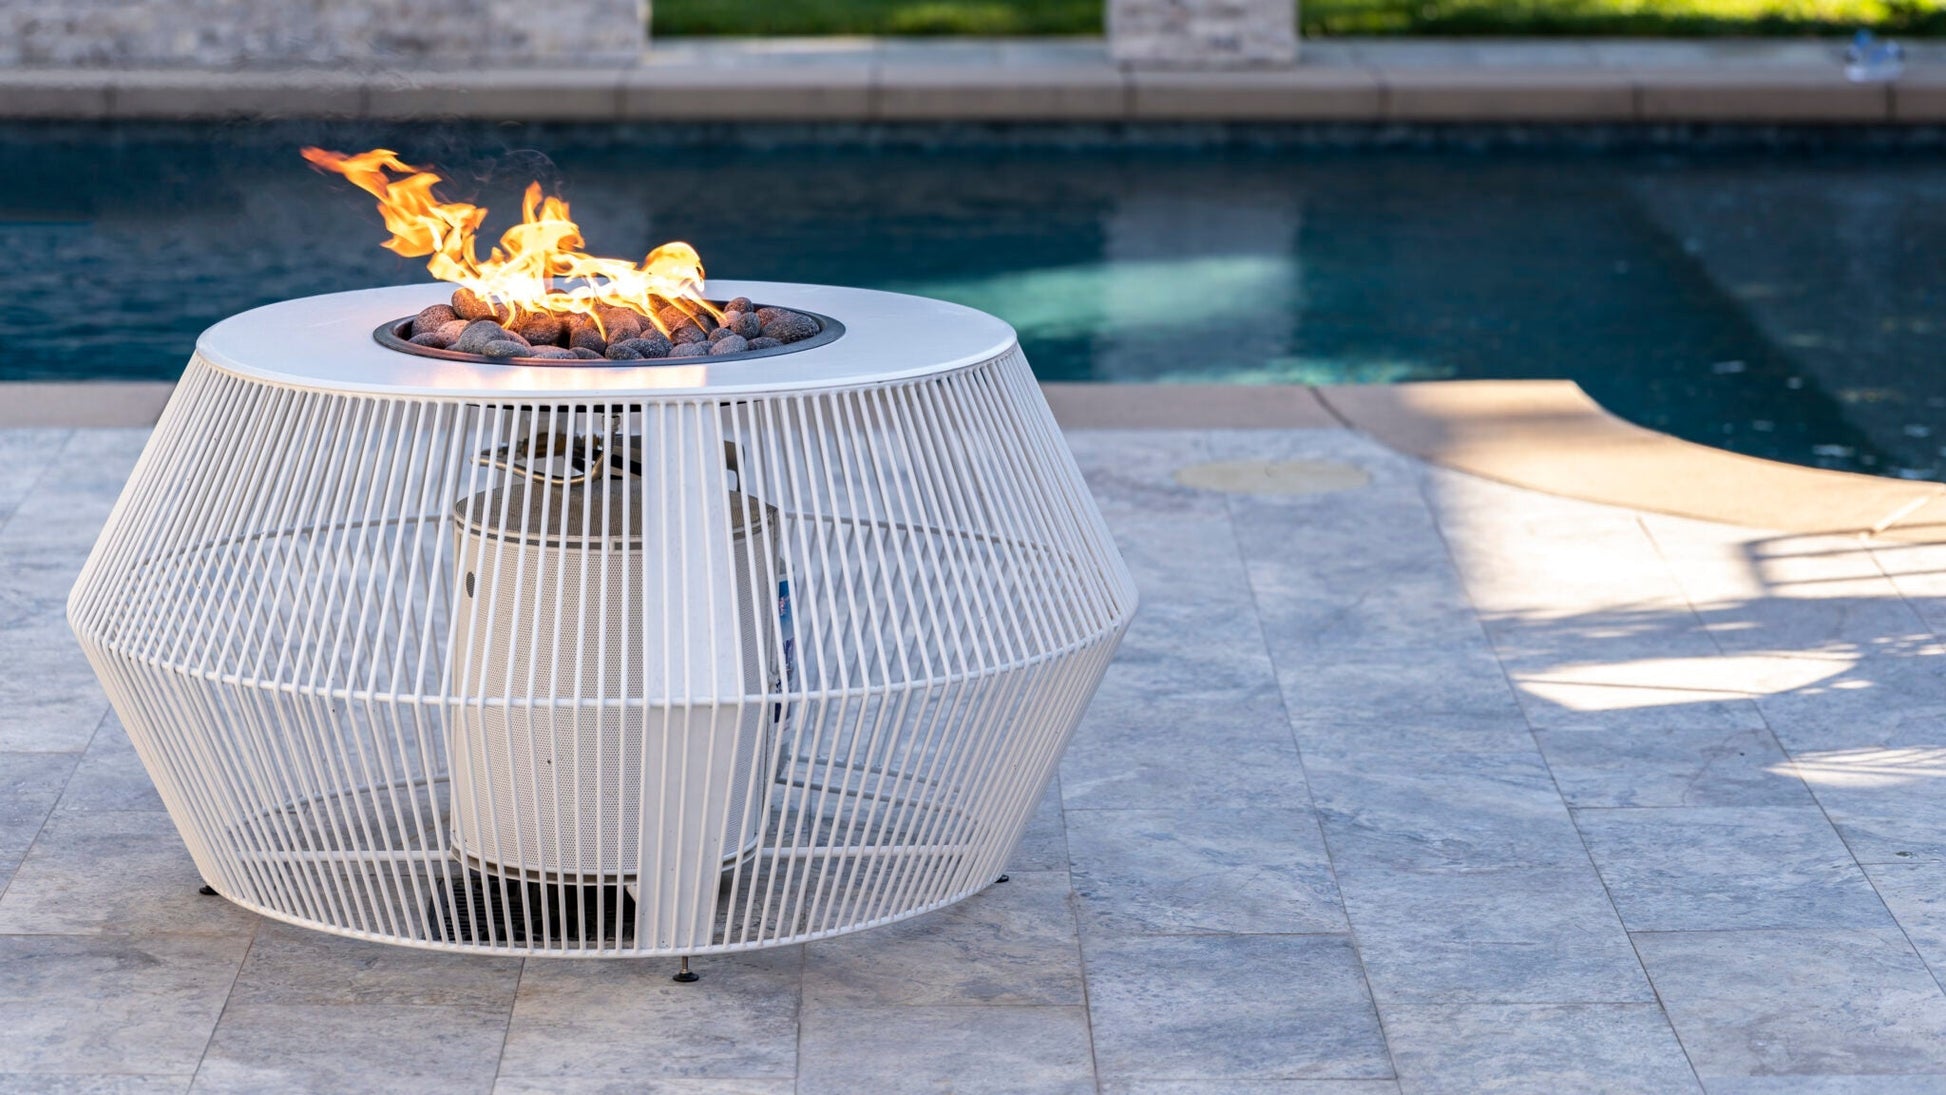 The Outdoor Plus Round Cesto 60" Black & White Powder Coated Metal Liquid Propane Fire Pit with 12V Electronic Ignition